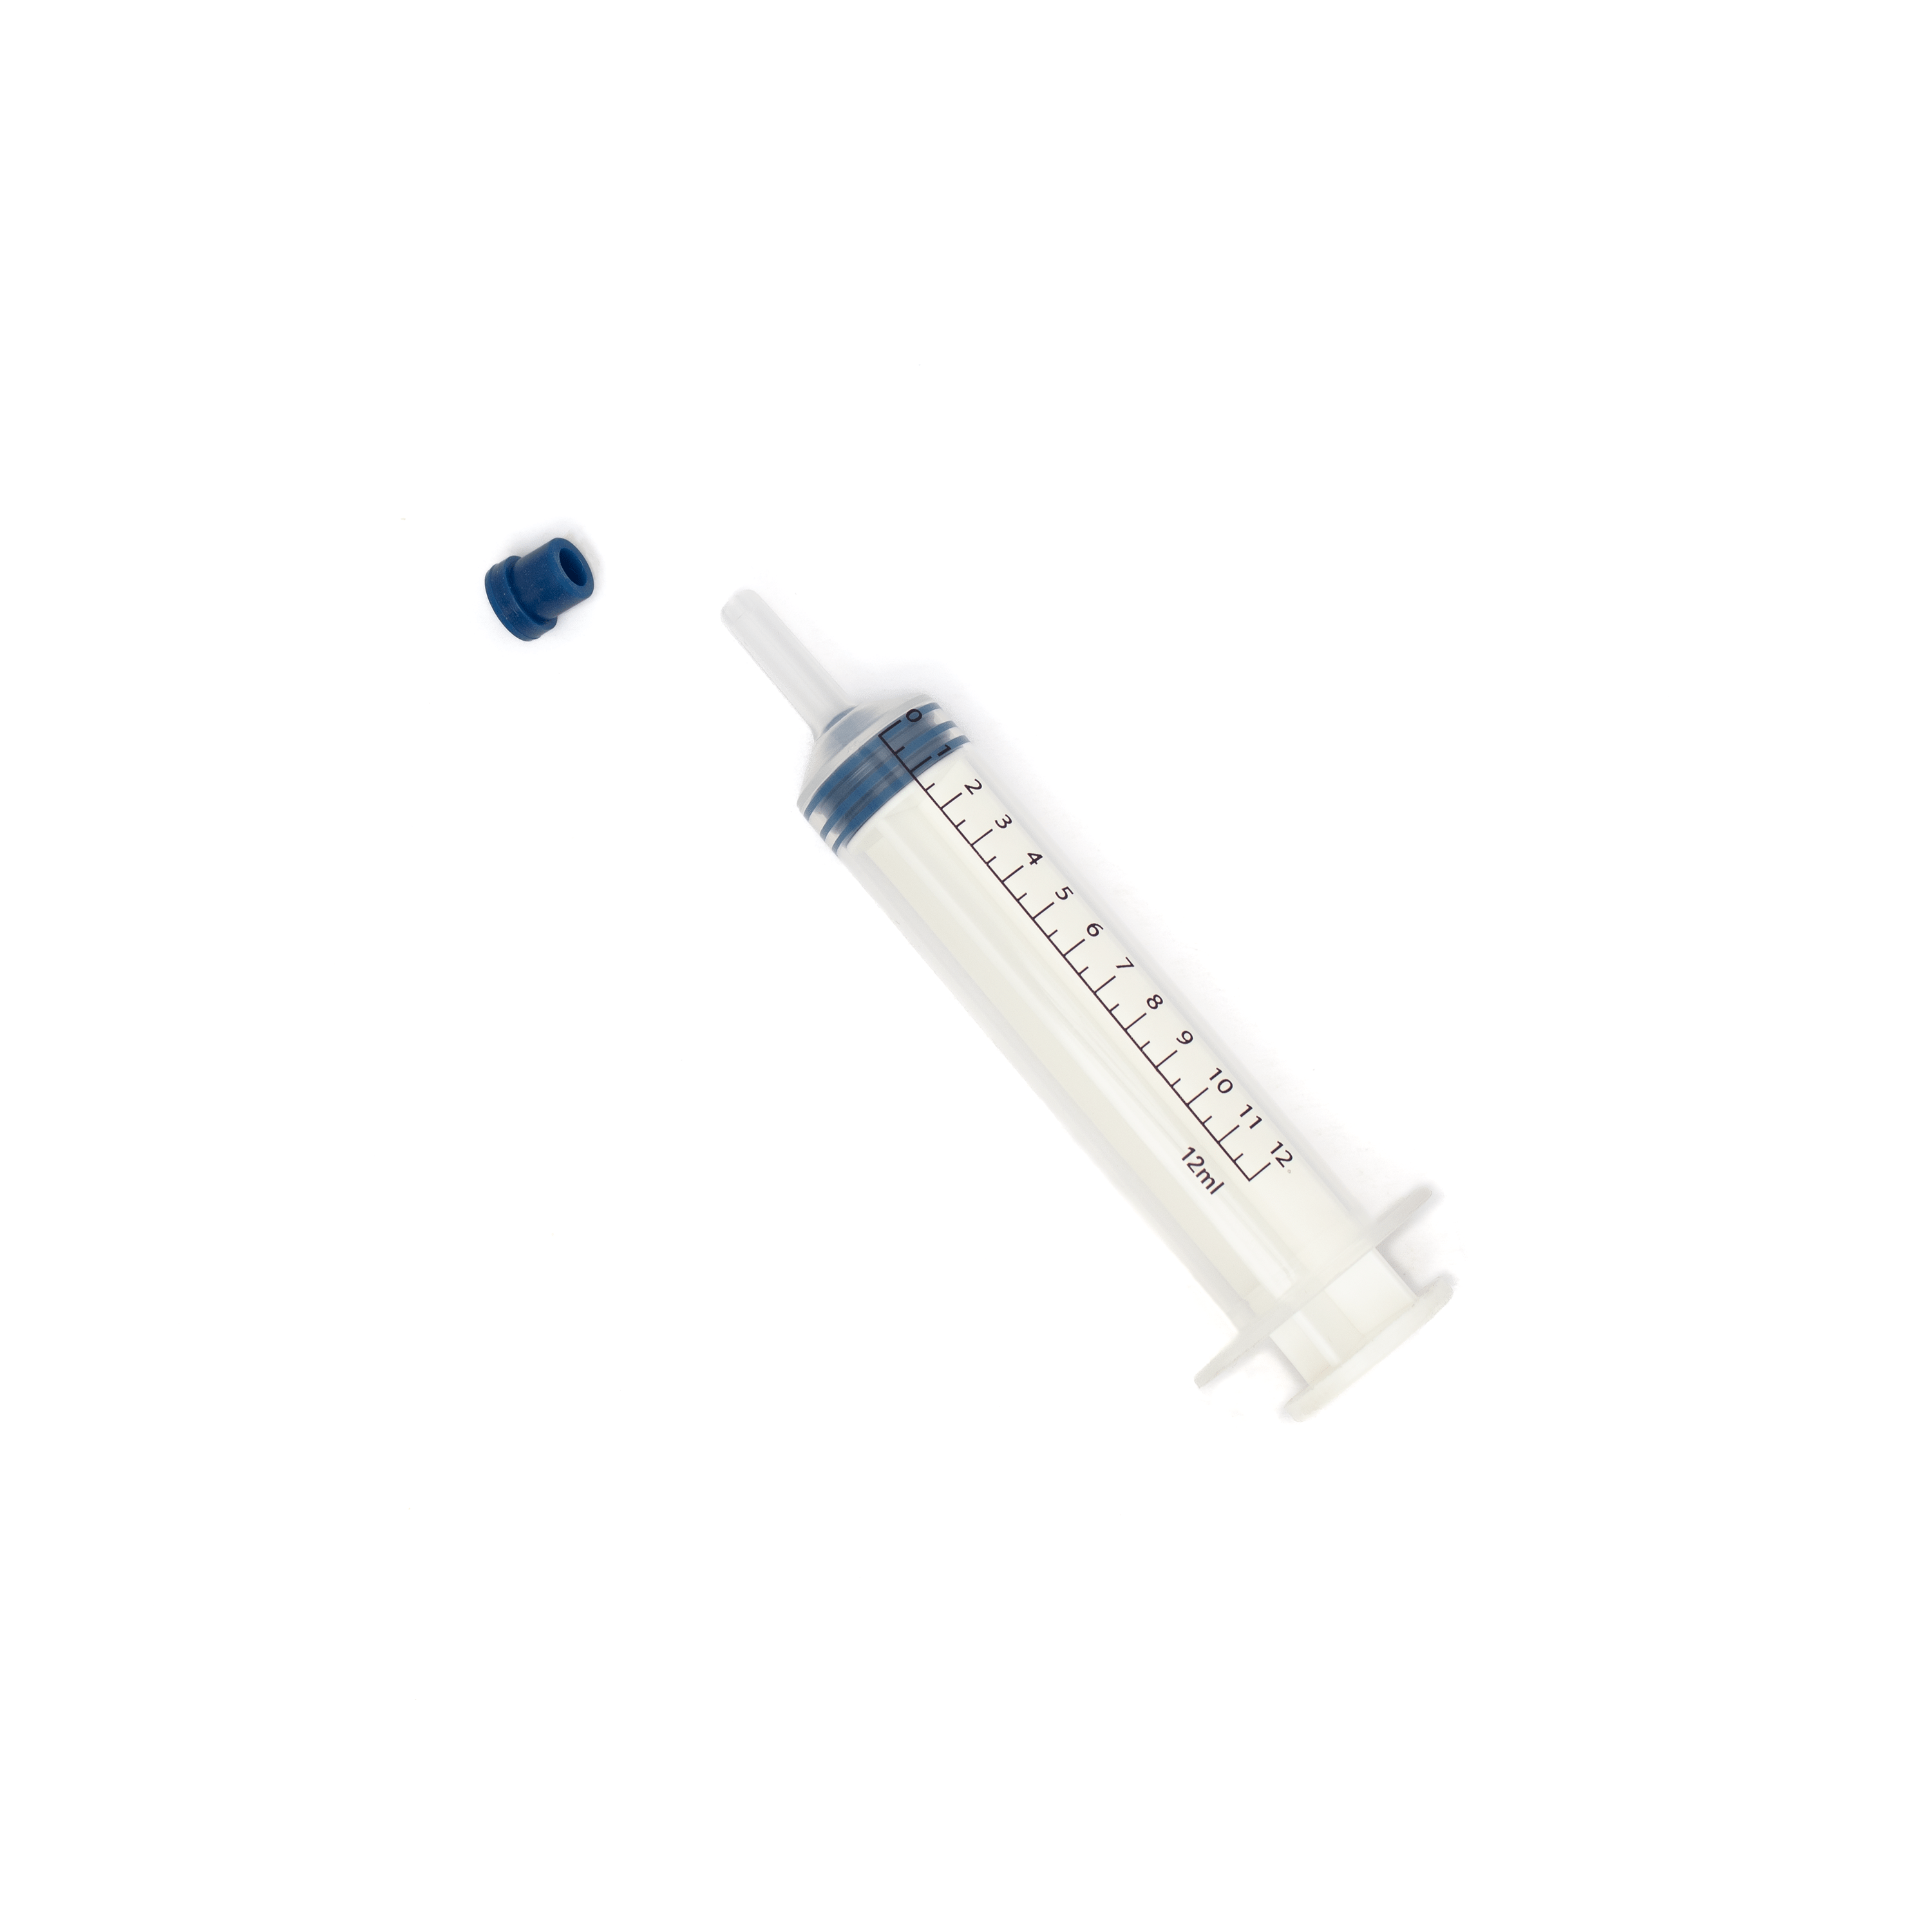 Top view of P-12ML-SYR-LL-C, a 12cc Luer Lock and Cap syringe with the cap off.